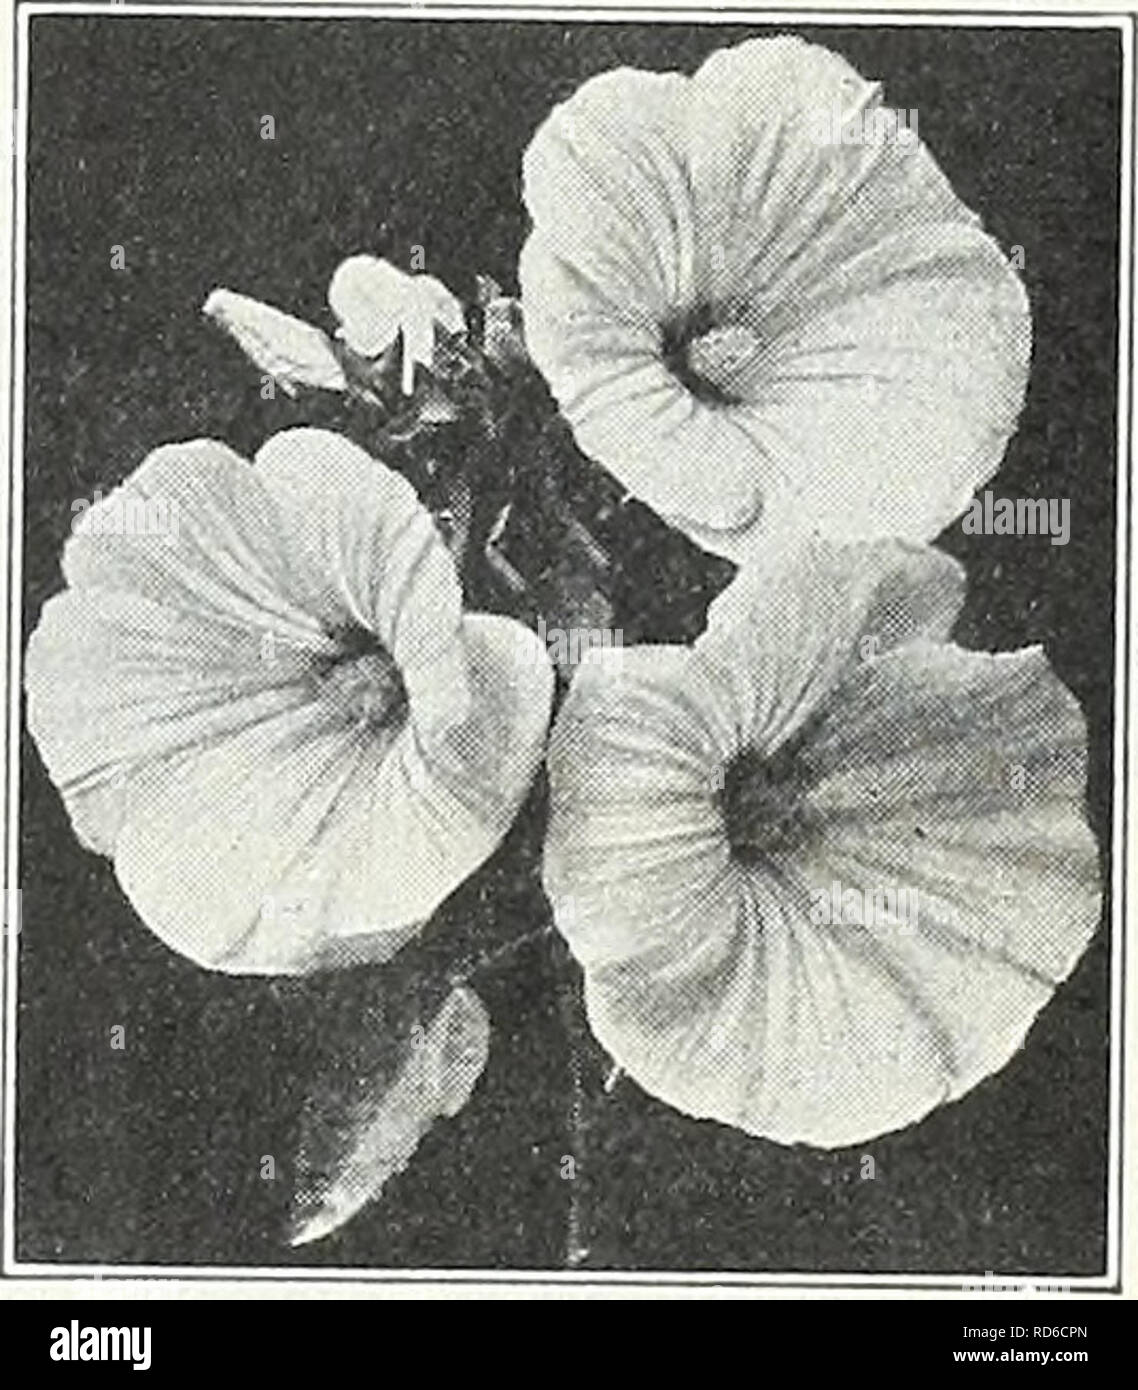 . Currie's garden annual : spring 1934 59th year. Flowers Seeds Catalogs; Bulbs (Plants) Seeds Catalogs; Vegetables Seeds Catalogs; Nurseries (Horticulture) Catalogs; Plants, Ornamental Catalogs; Gardening Equipment and supplies Catalogs. LINUM (Flax) Free-Flowering, Pretty Plants Grandiflorum Coccineum—A beauti- ful dwarf annual, with crimson flow- ers Pkt. 10c PERENNIAL LINUM (See page 51) LEPTOSIPHON Free flowering dwarf hardy an- nuals bearing bright flowers profuse- ly in many colors, suitable for edging or rock work. Finest Mixed Pkt. 10c LOPHOSPERMUM SCANDENS—A beautiful climbing annual Stock Photo